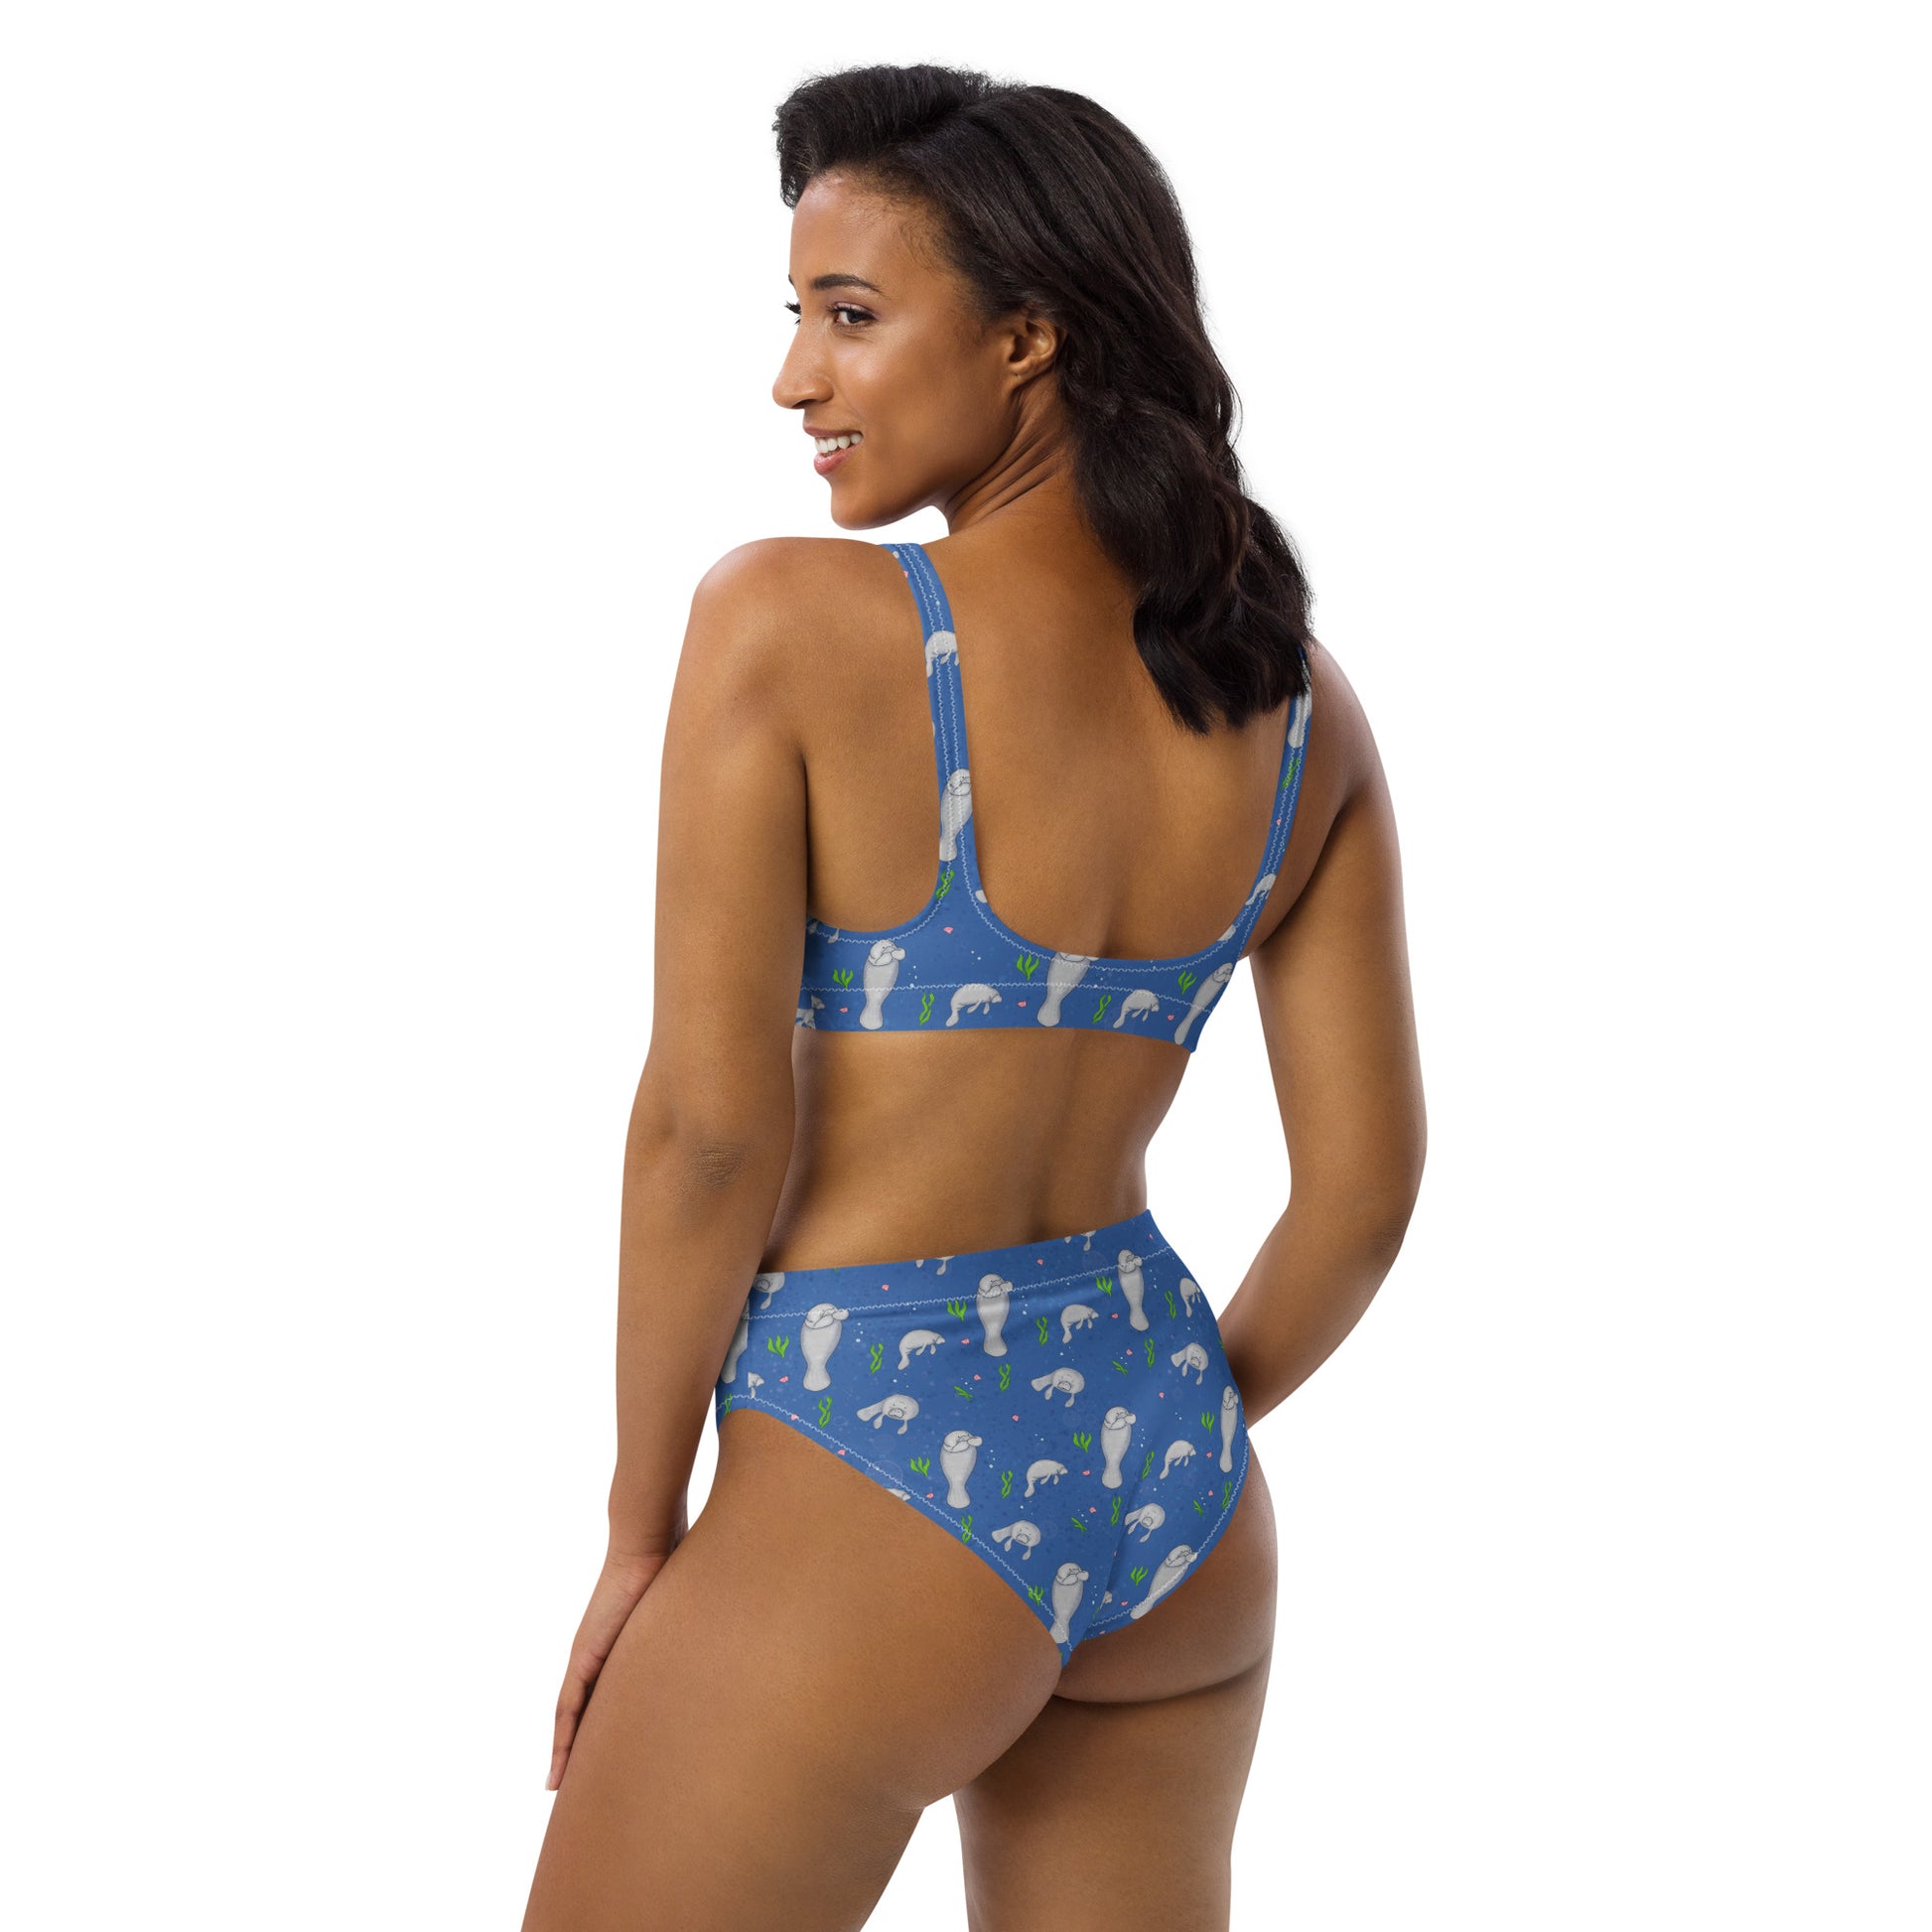 High-waisted bikini with hand-illustrated manatee pattern on a blue background. Made from recycled polyester combined with stretchable fabric. Has double layers and removable pads. Back view shown on female model facing left.